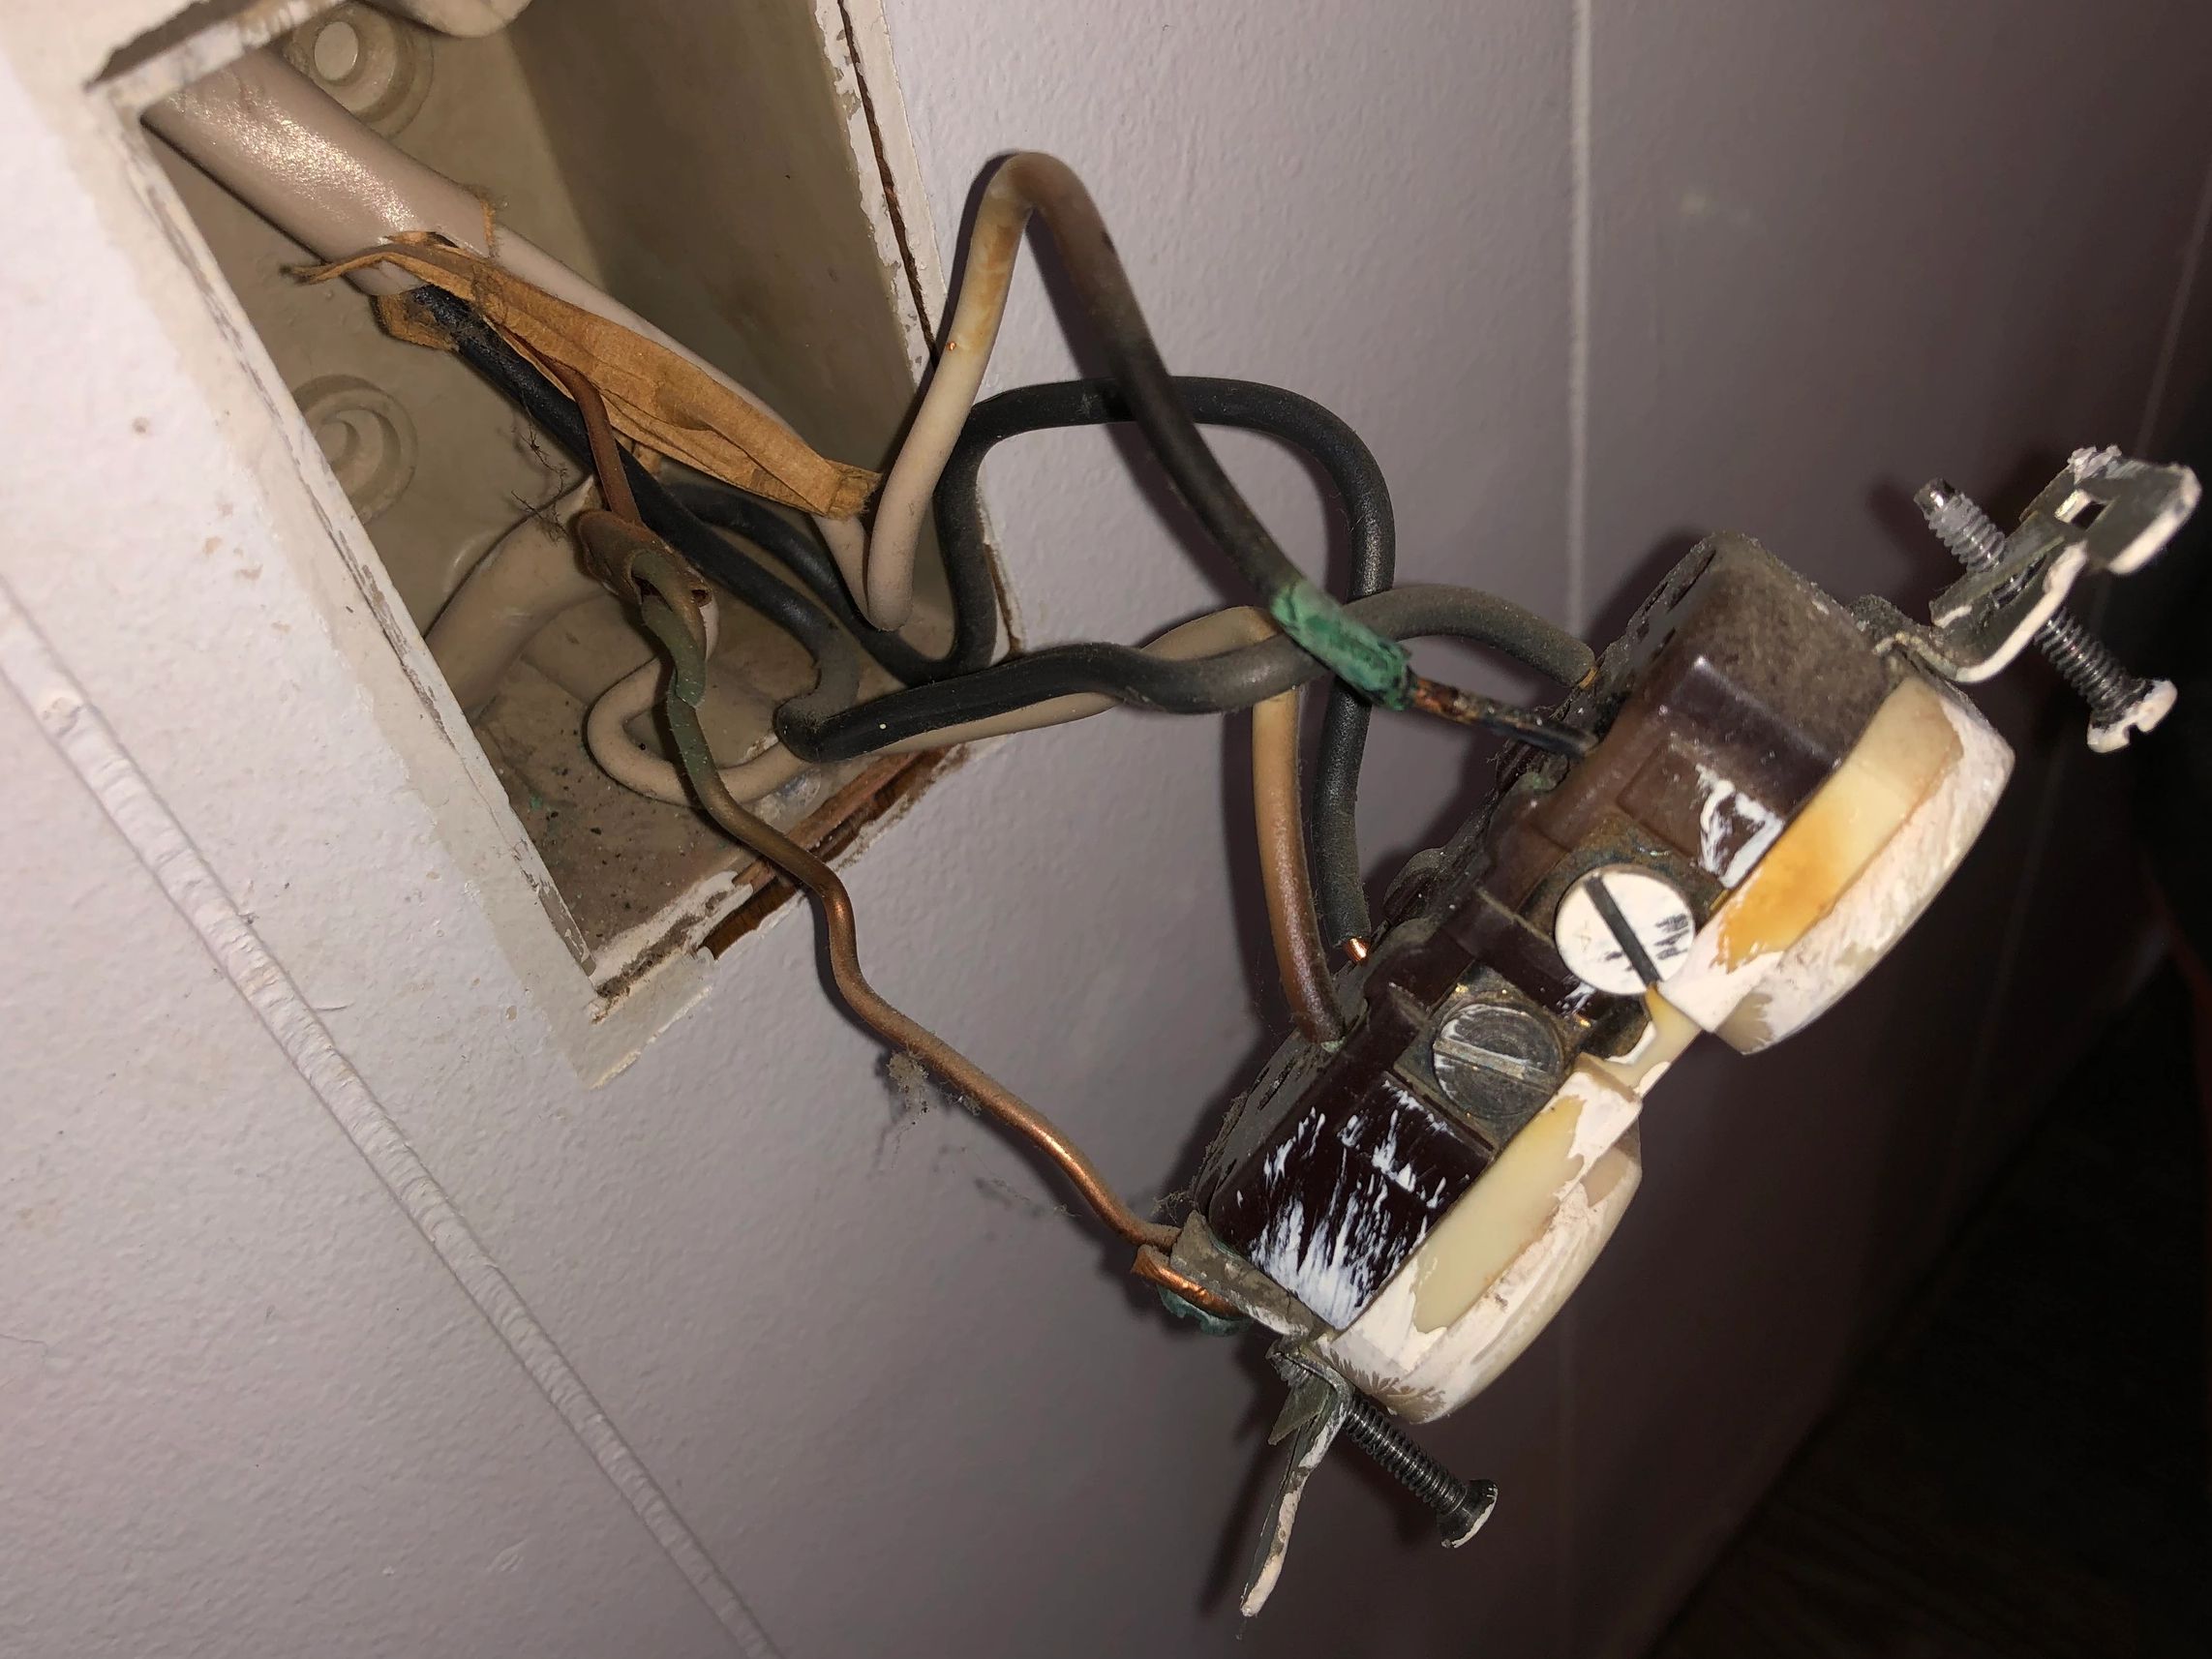 Burning neutral wire caused from poor connection.